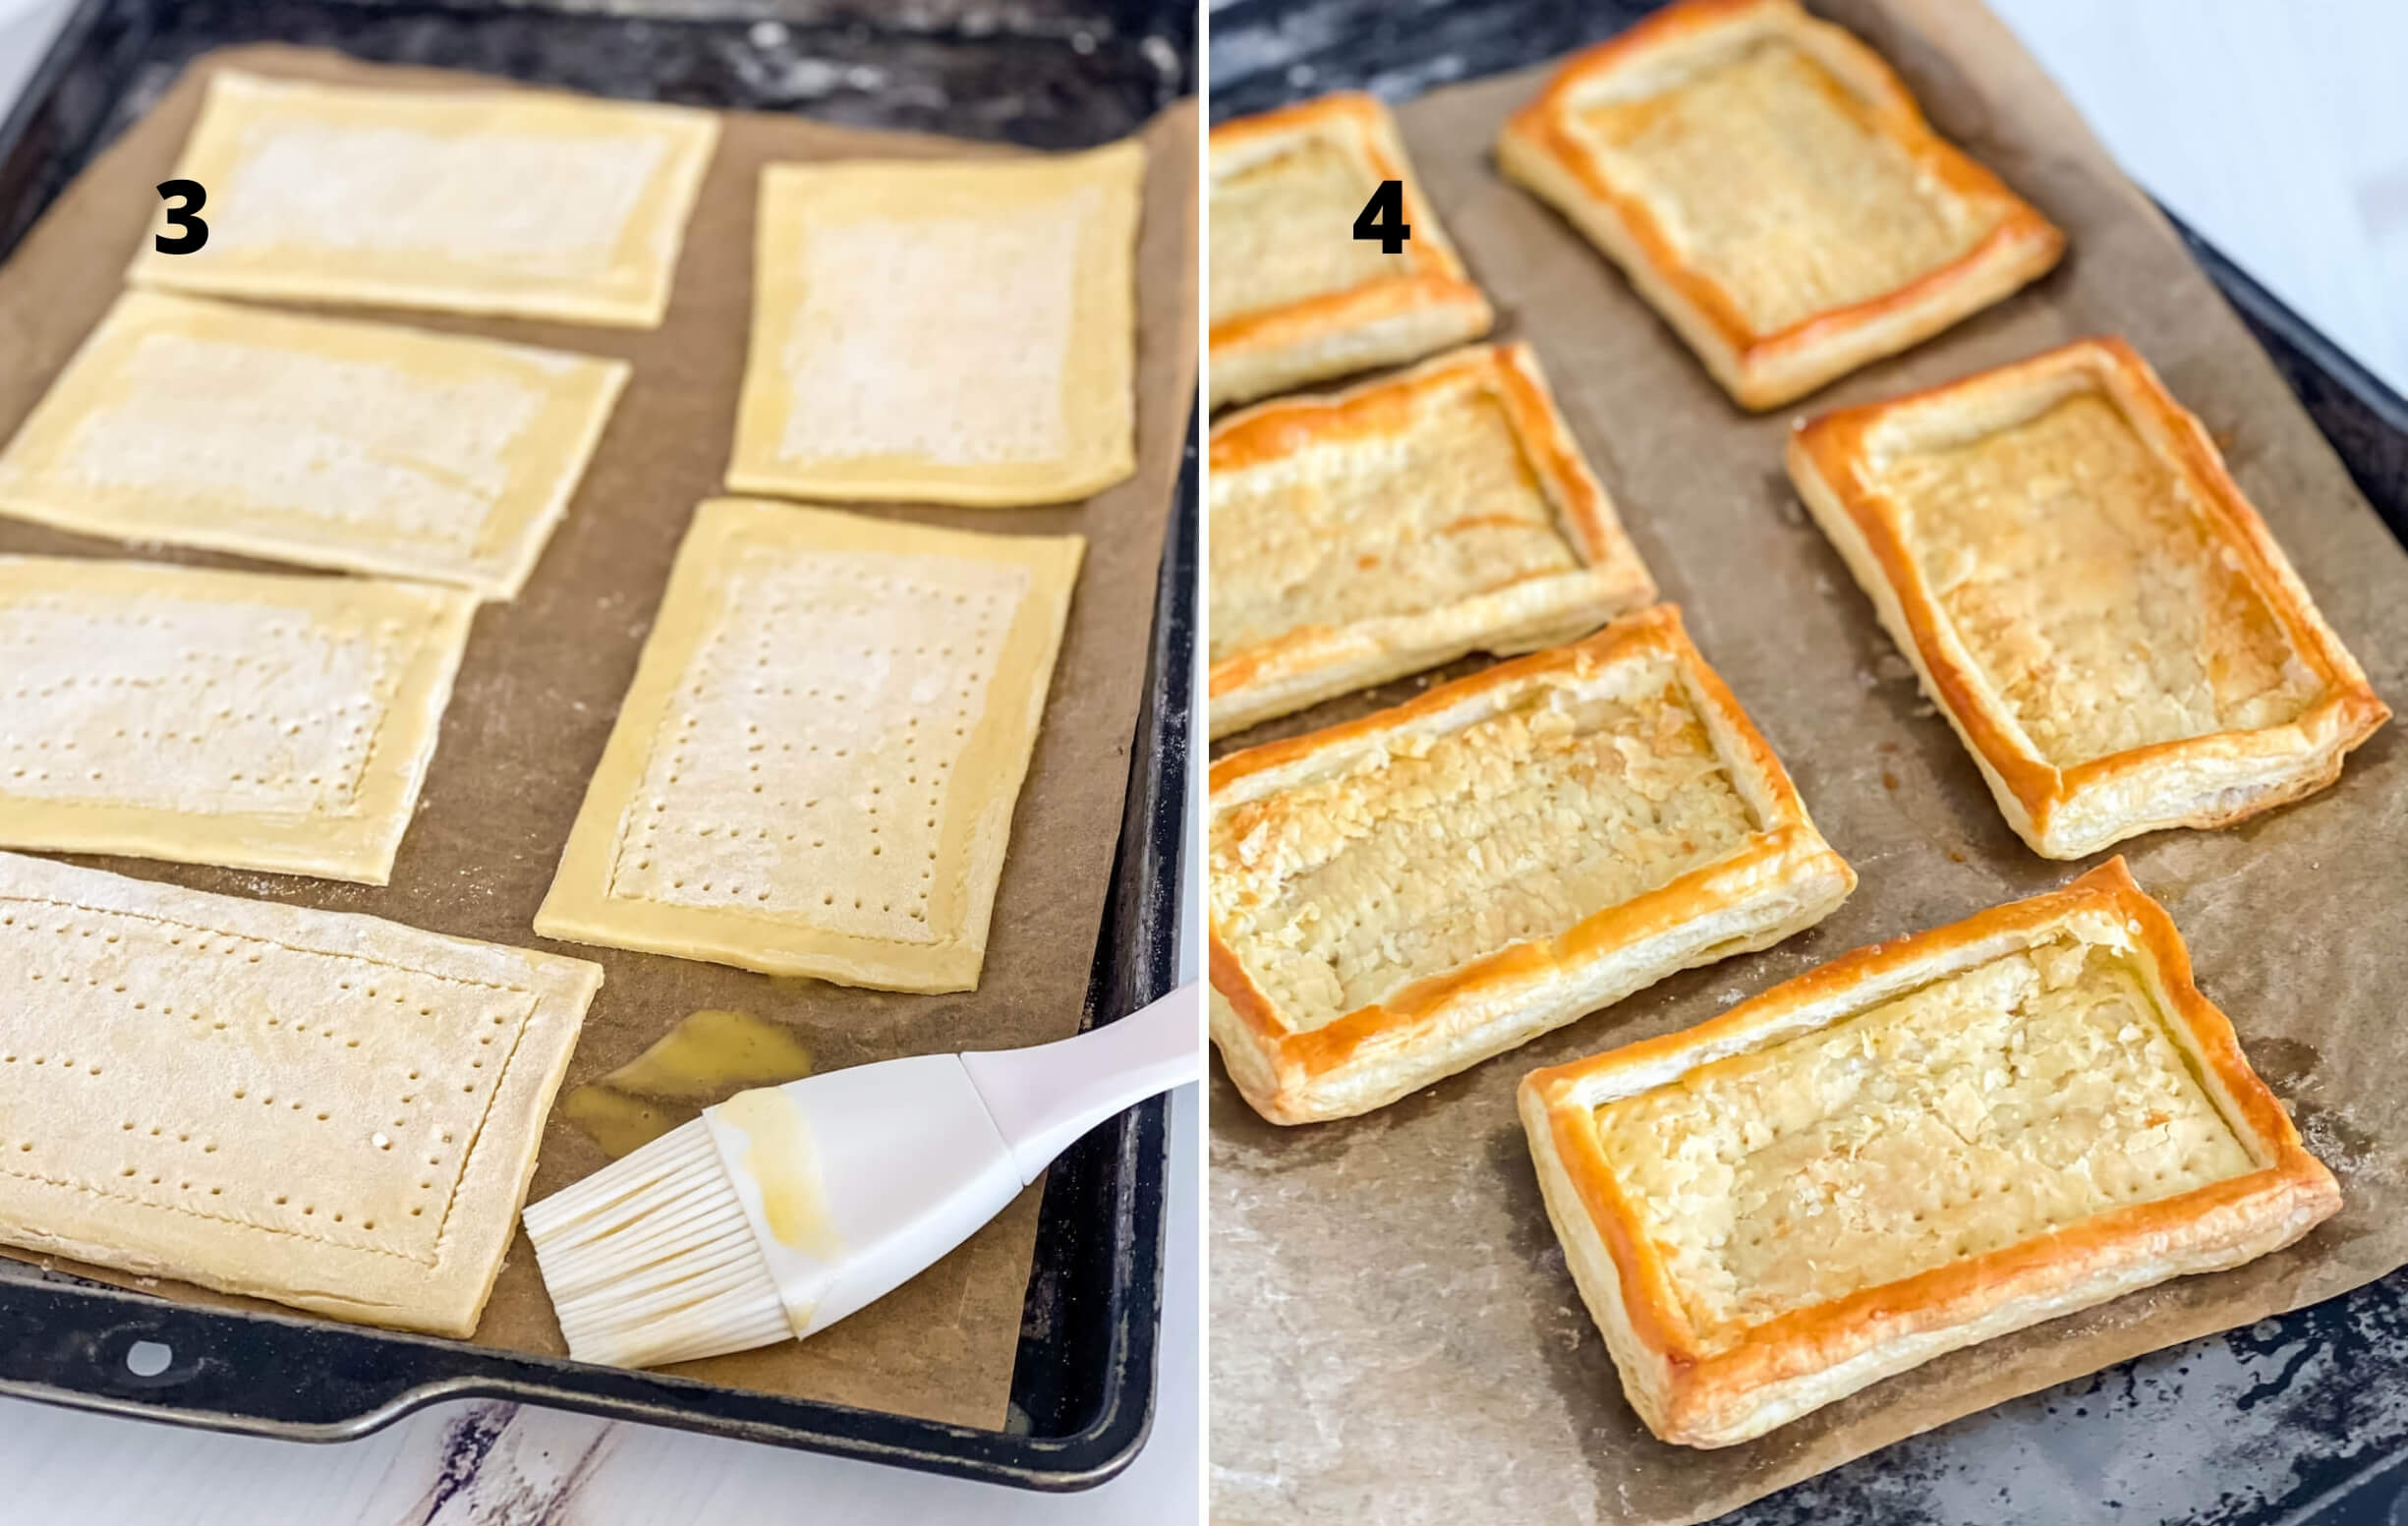 Egg wash and baking puff pastry